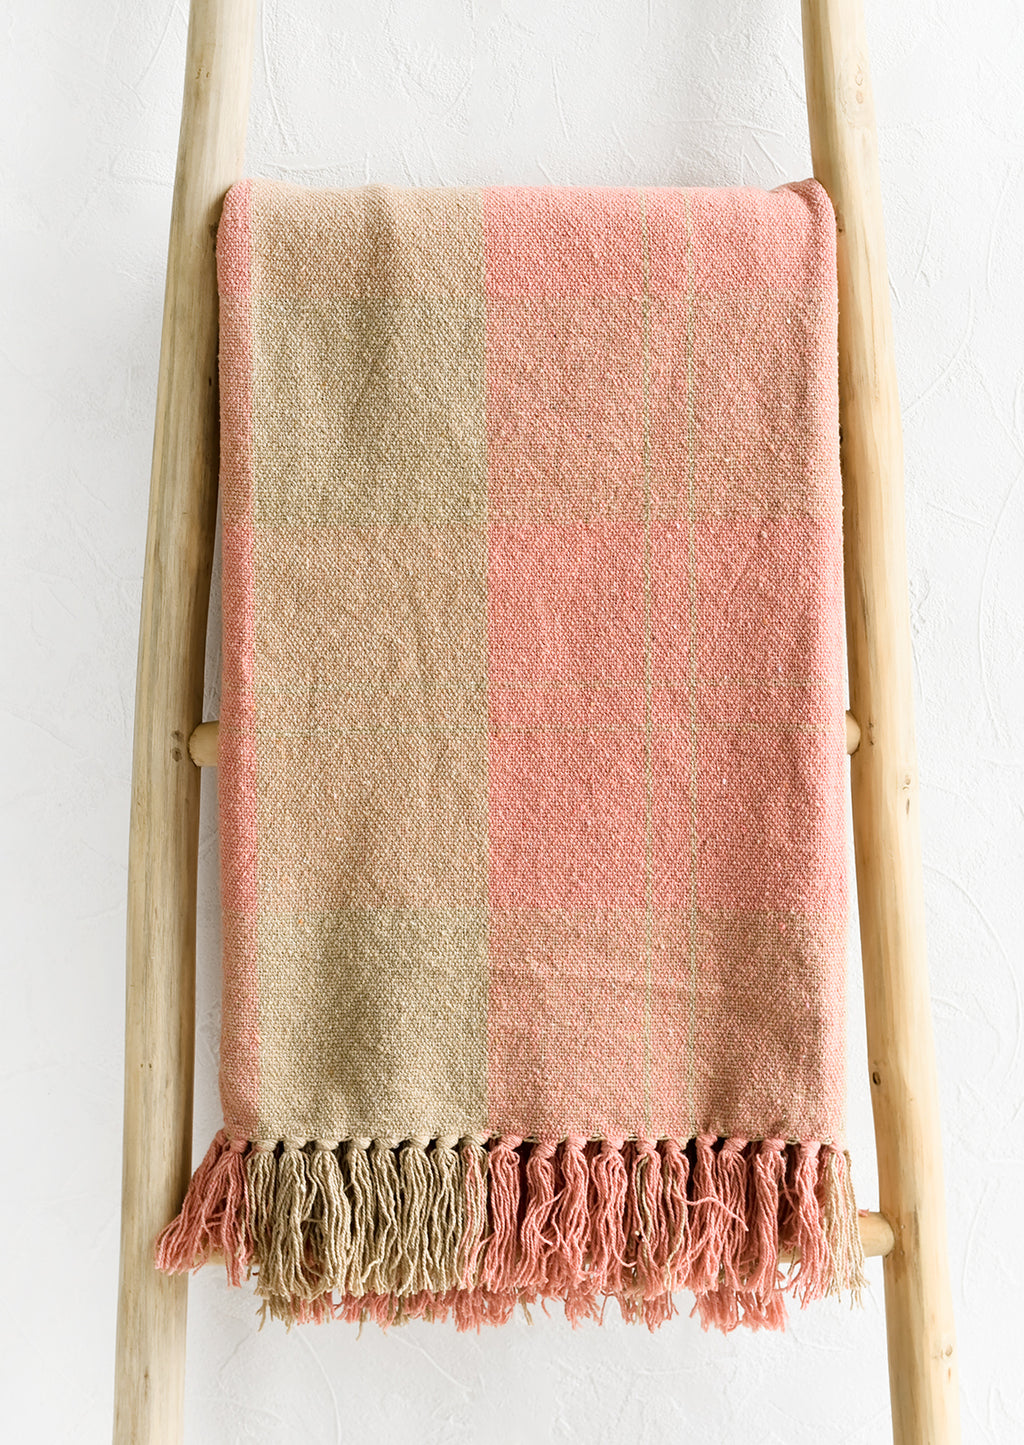 1: A cotton blank in peach and tan check pattern with fringe trim.